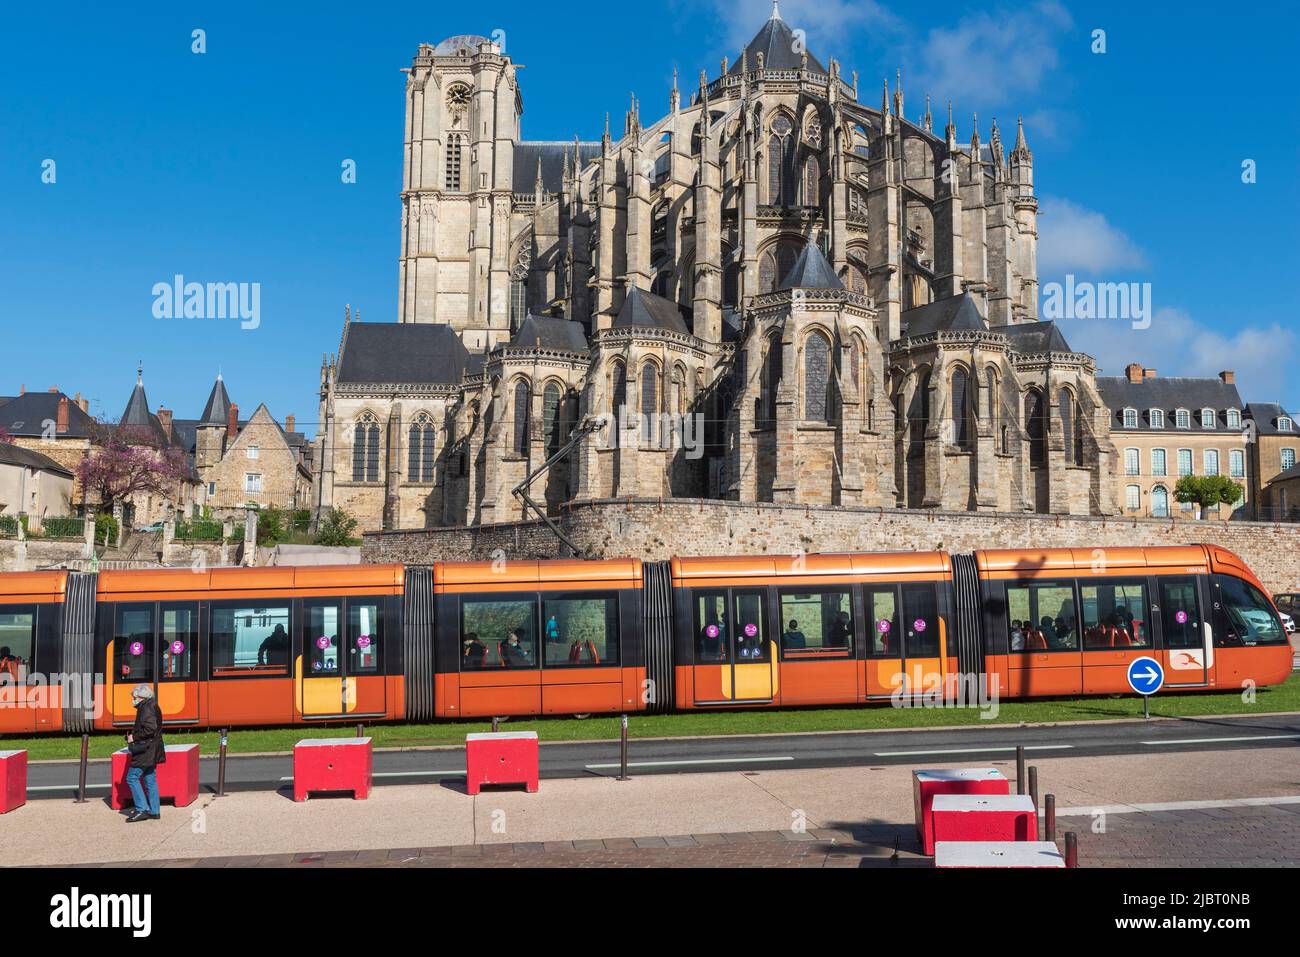 France, Sarthe, Le Mans, Cite Plantagenet (Old Town), the St Julien cathedral, tramway Stock Photo